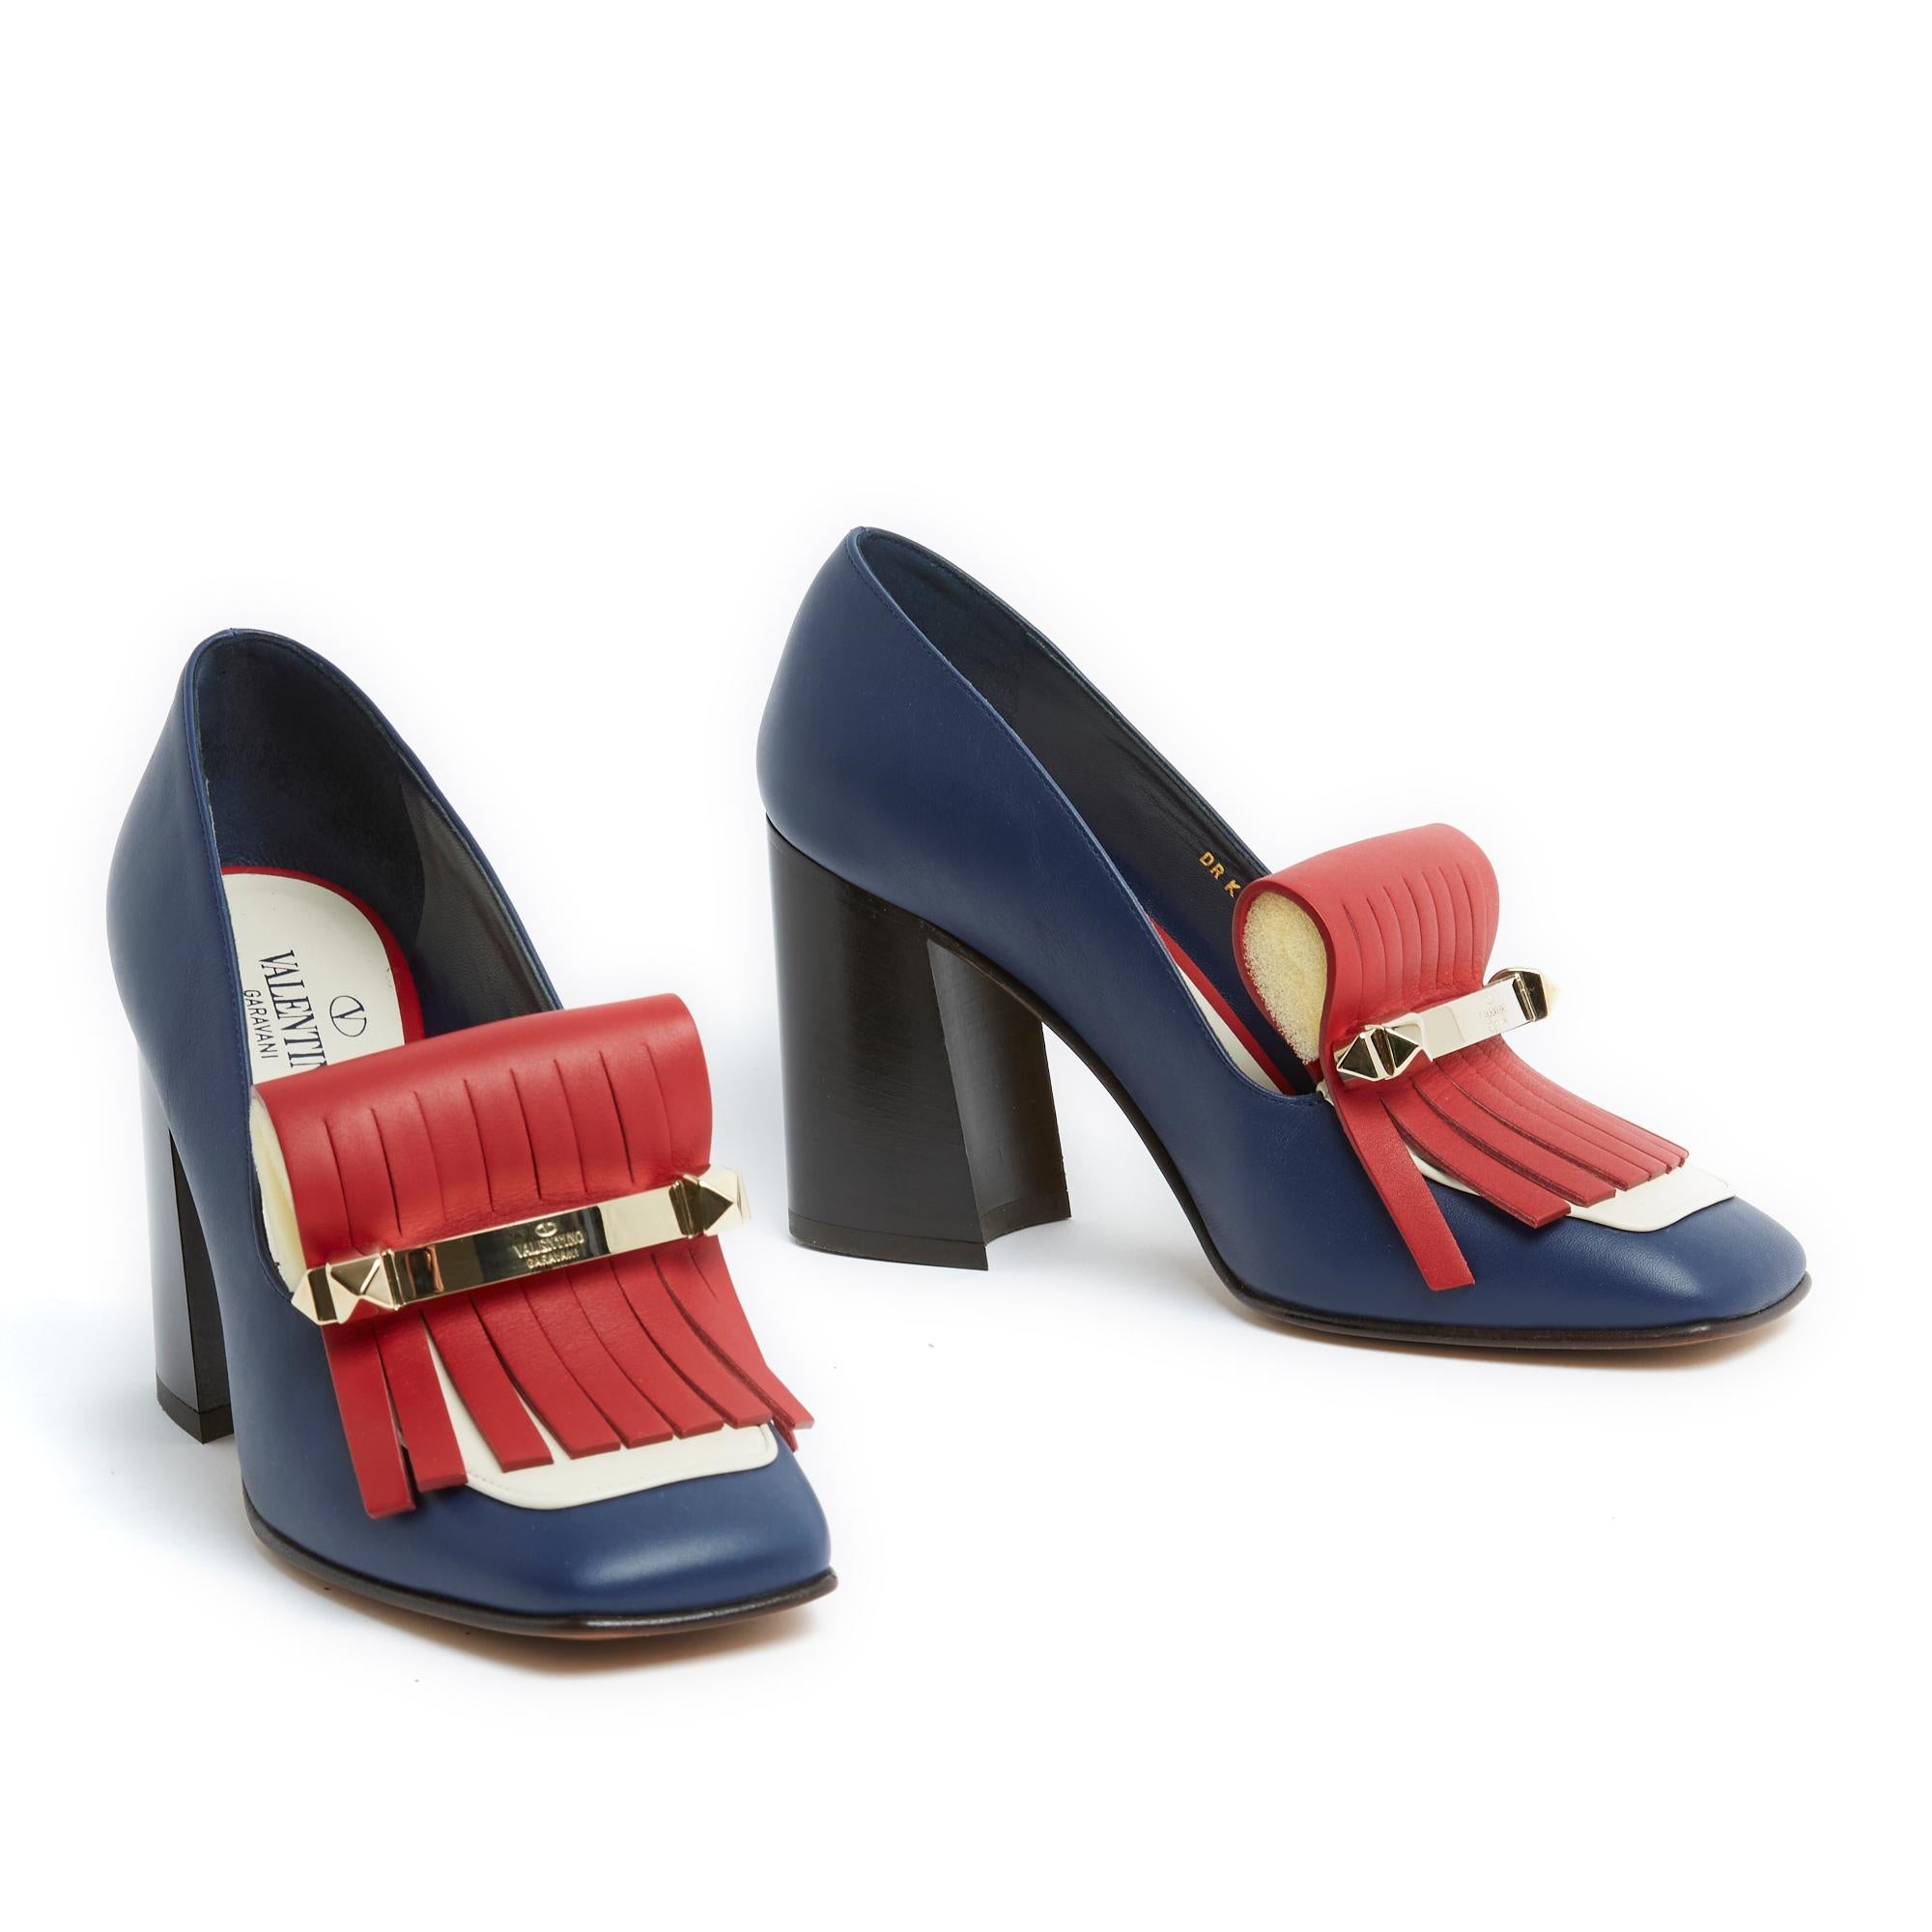 Valentino Garavani Rockstud series pumps in tricolor navy blue, red and ecru leather, branded barrette in rose gold-tone metal, wide heel covered in black leather. Size 38EU: heel 9 cm, insole 24.4 cm. The bar of the right shoe has a 